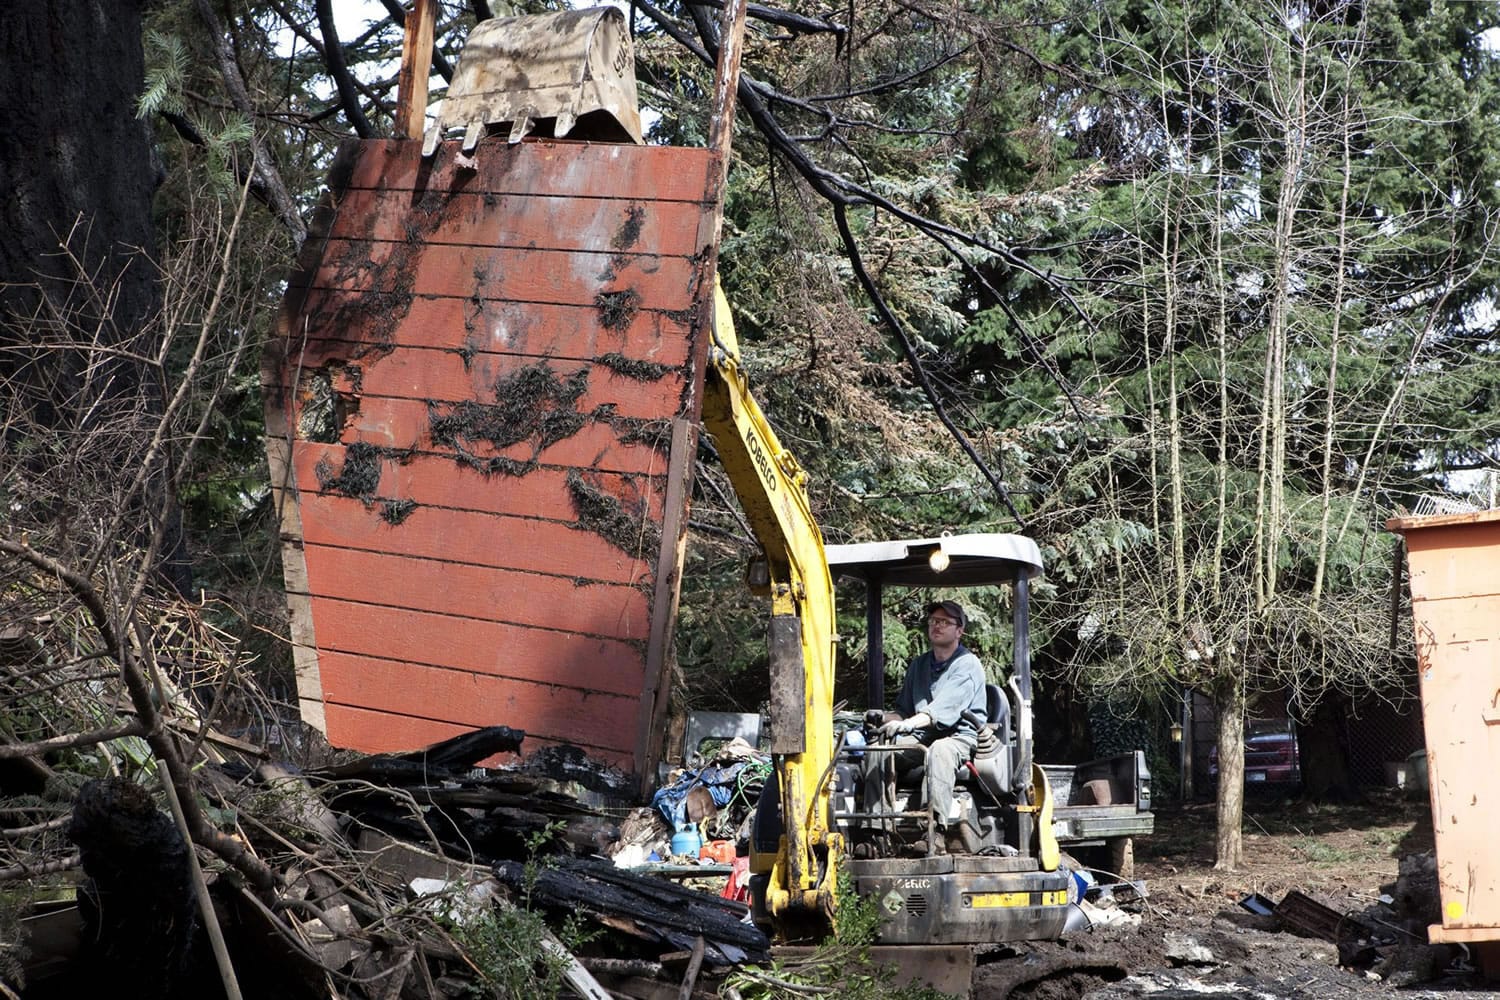 An excavator Monday morning removes burned debris from Steven Stanbary's property on F Place in Washougal. Stanbary killed himself, his wife and her twin sister Dec.